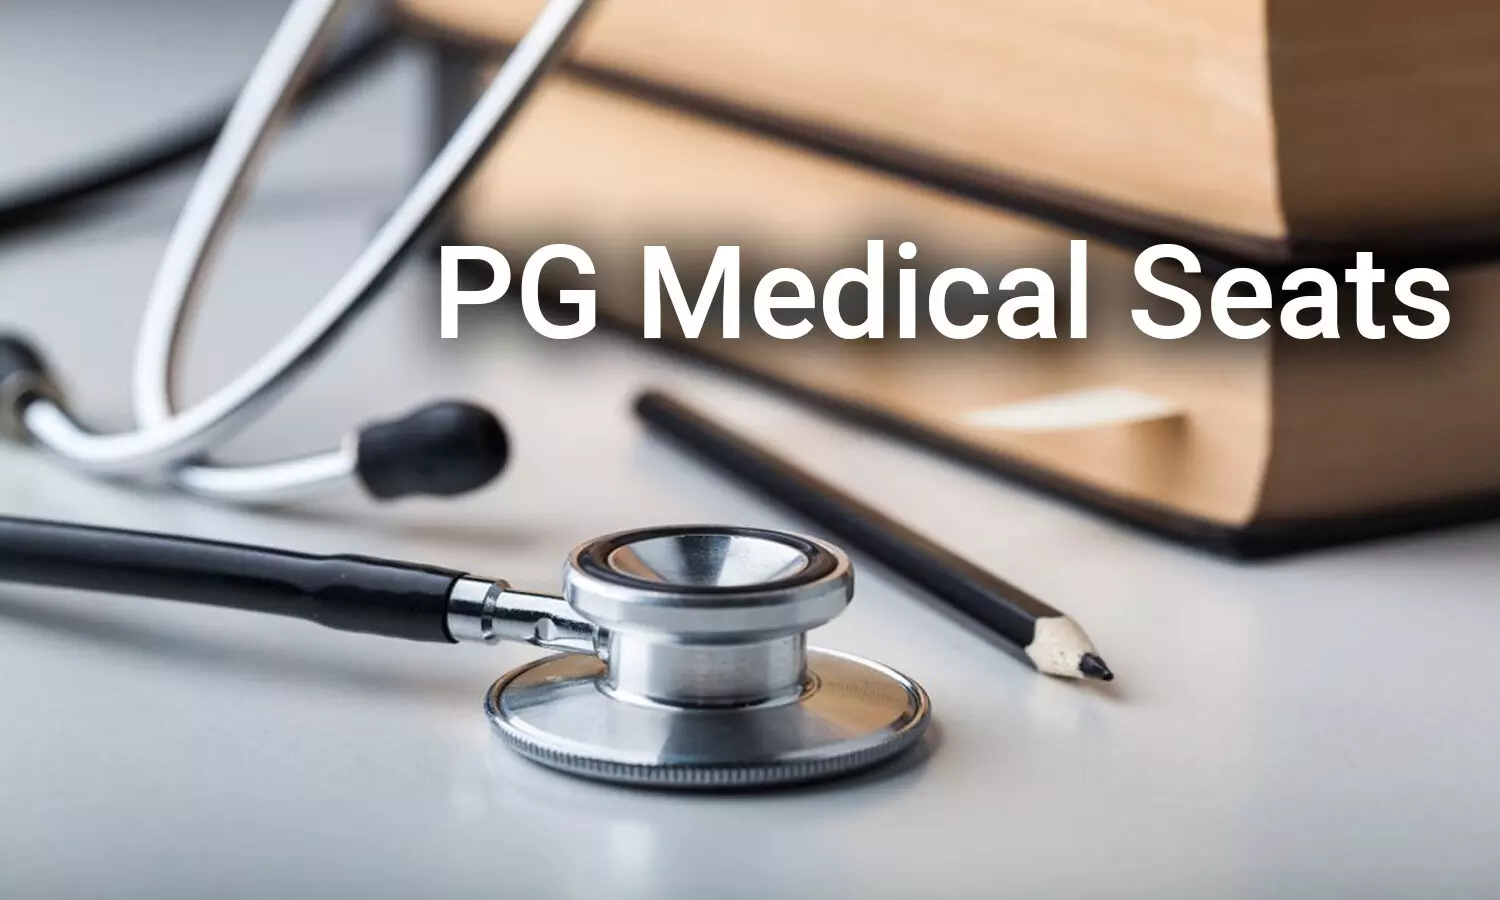 939 PG Medical Seats likely to be added in Andhra Pradesh